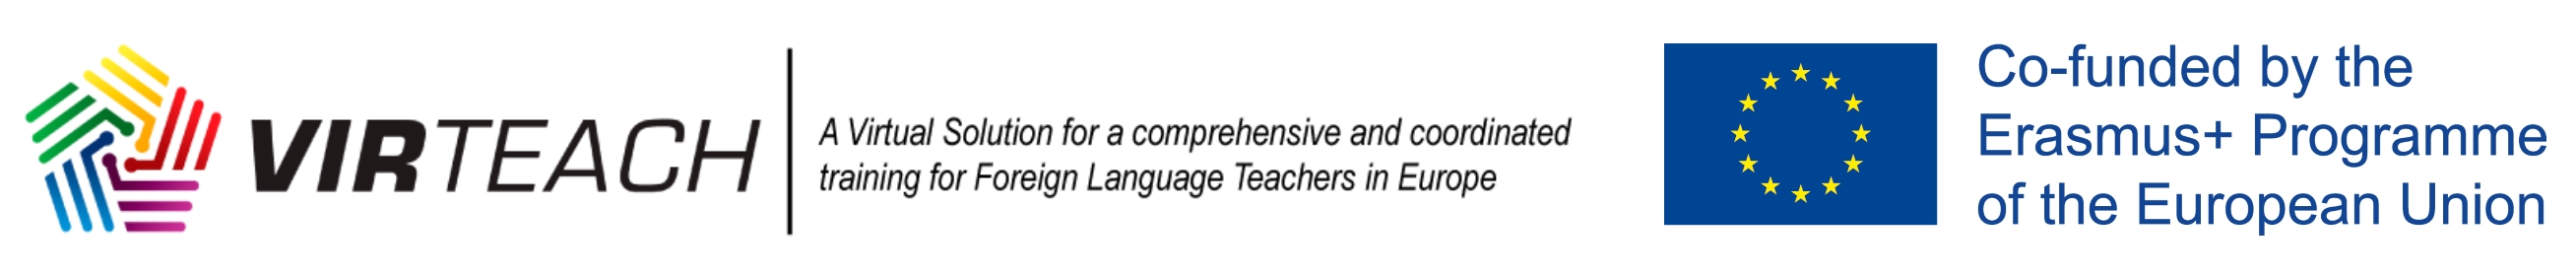 VirTeach. A virtual Solution for a comprehensive and coordinated training for Foreing Lenguage Teachers in Europe. Co-funded by the Erasmus+ Programme of the European Union